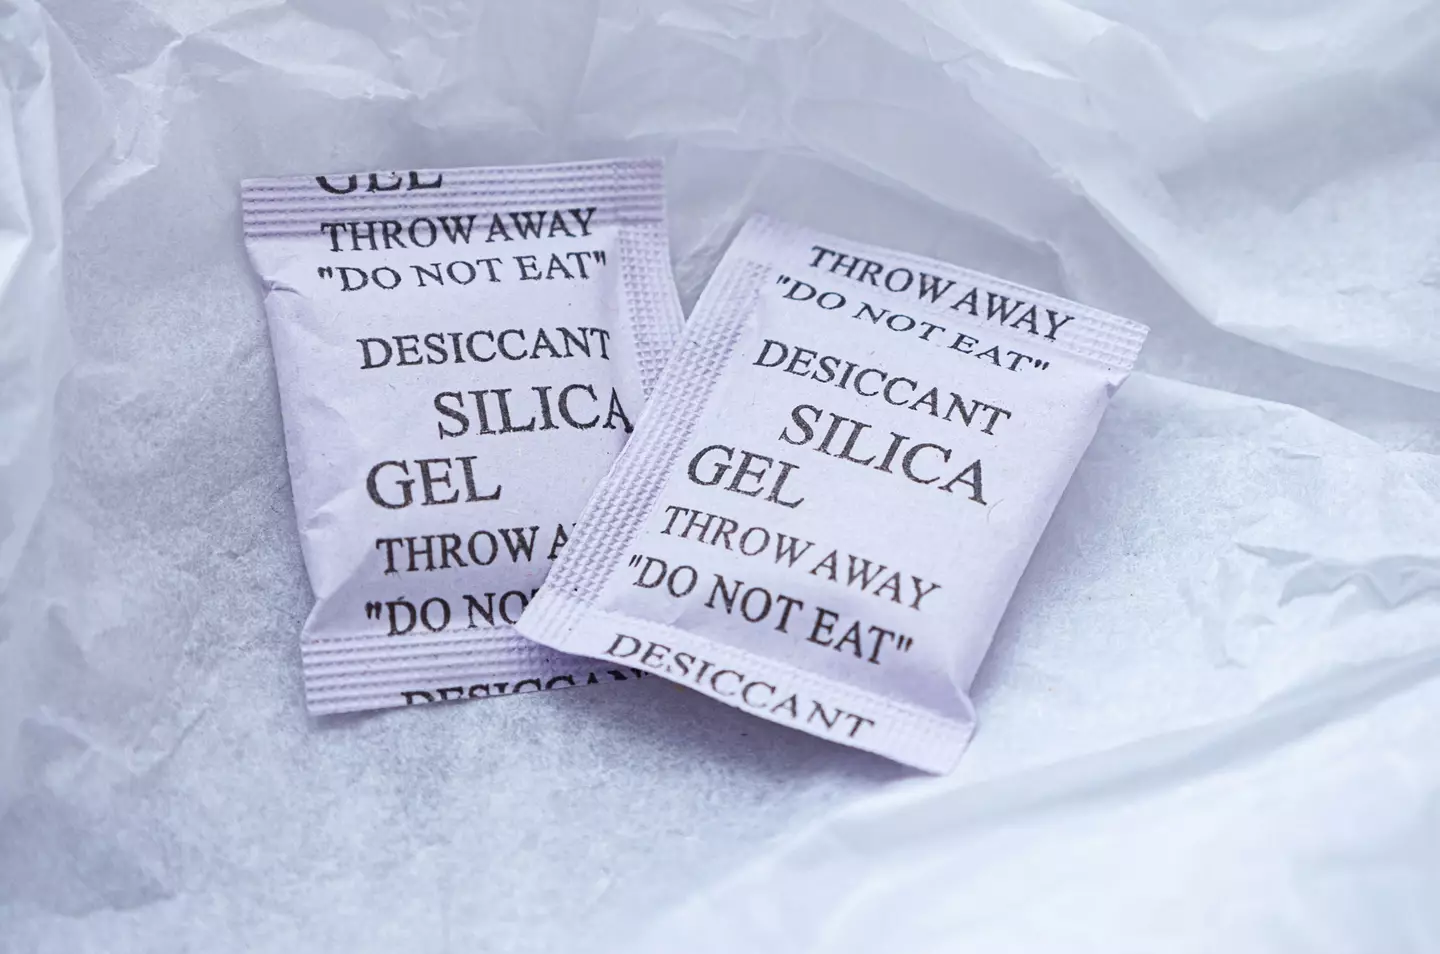 The little packets often come with new purchases and have worrying warnings on them.